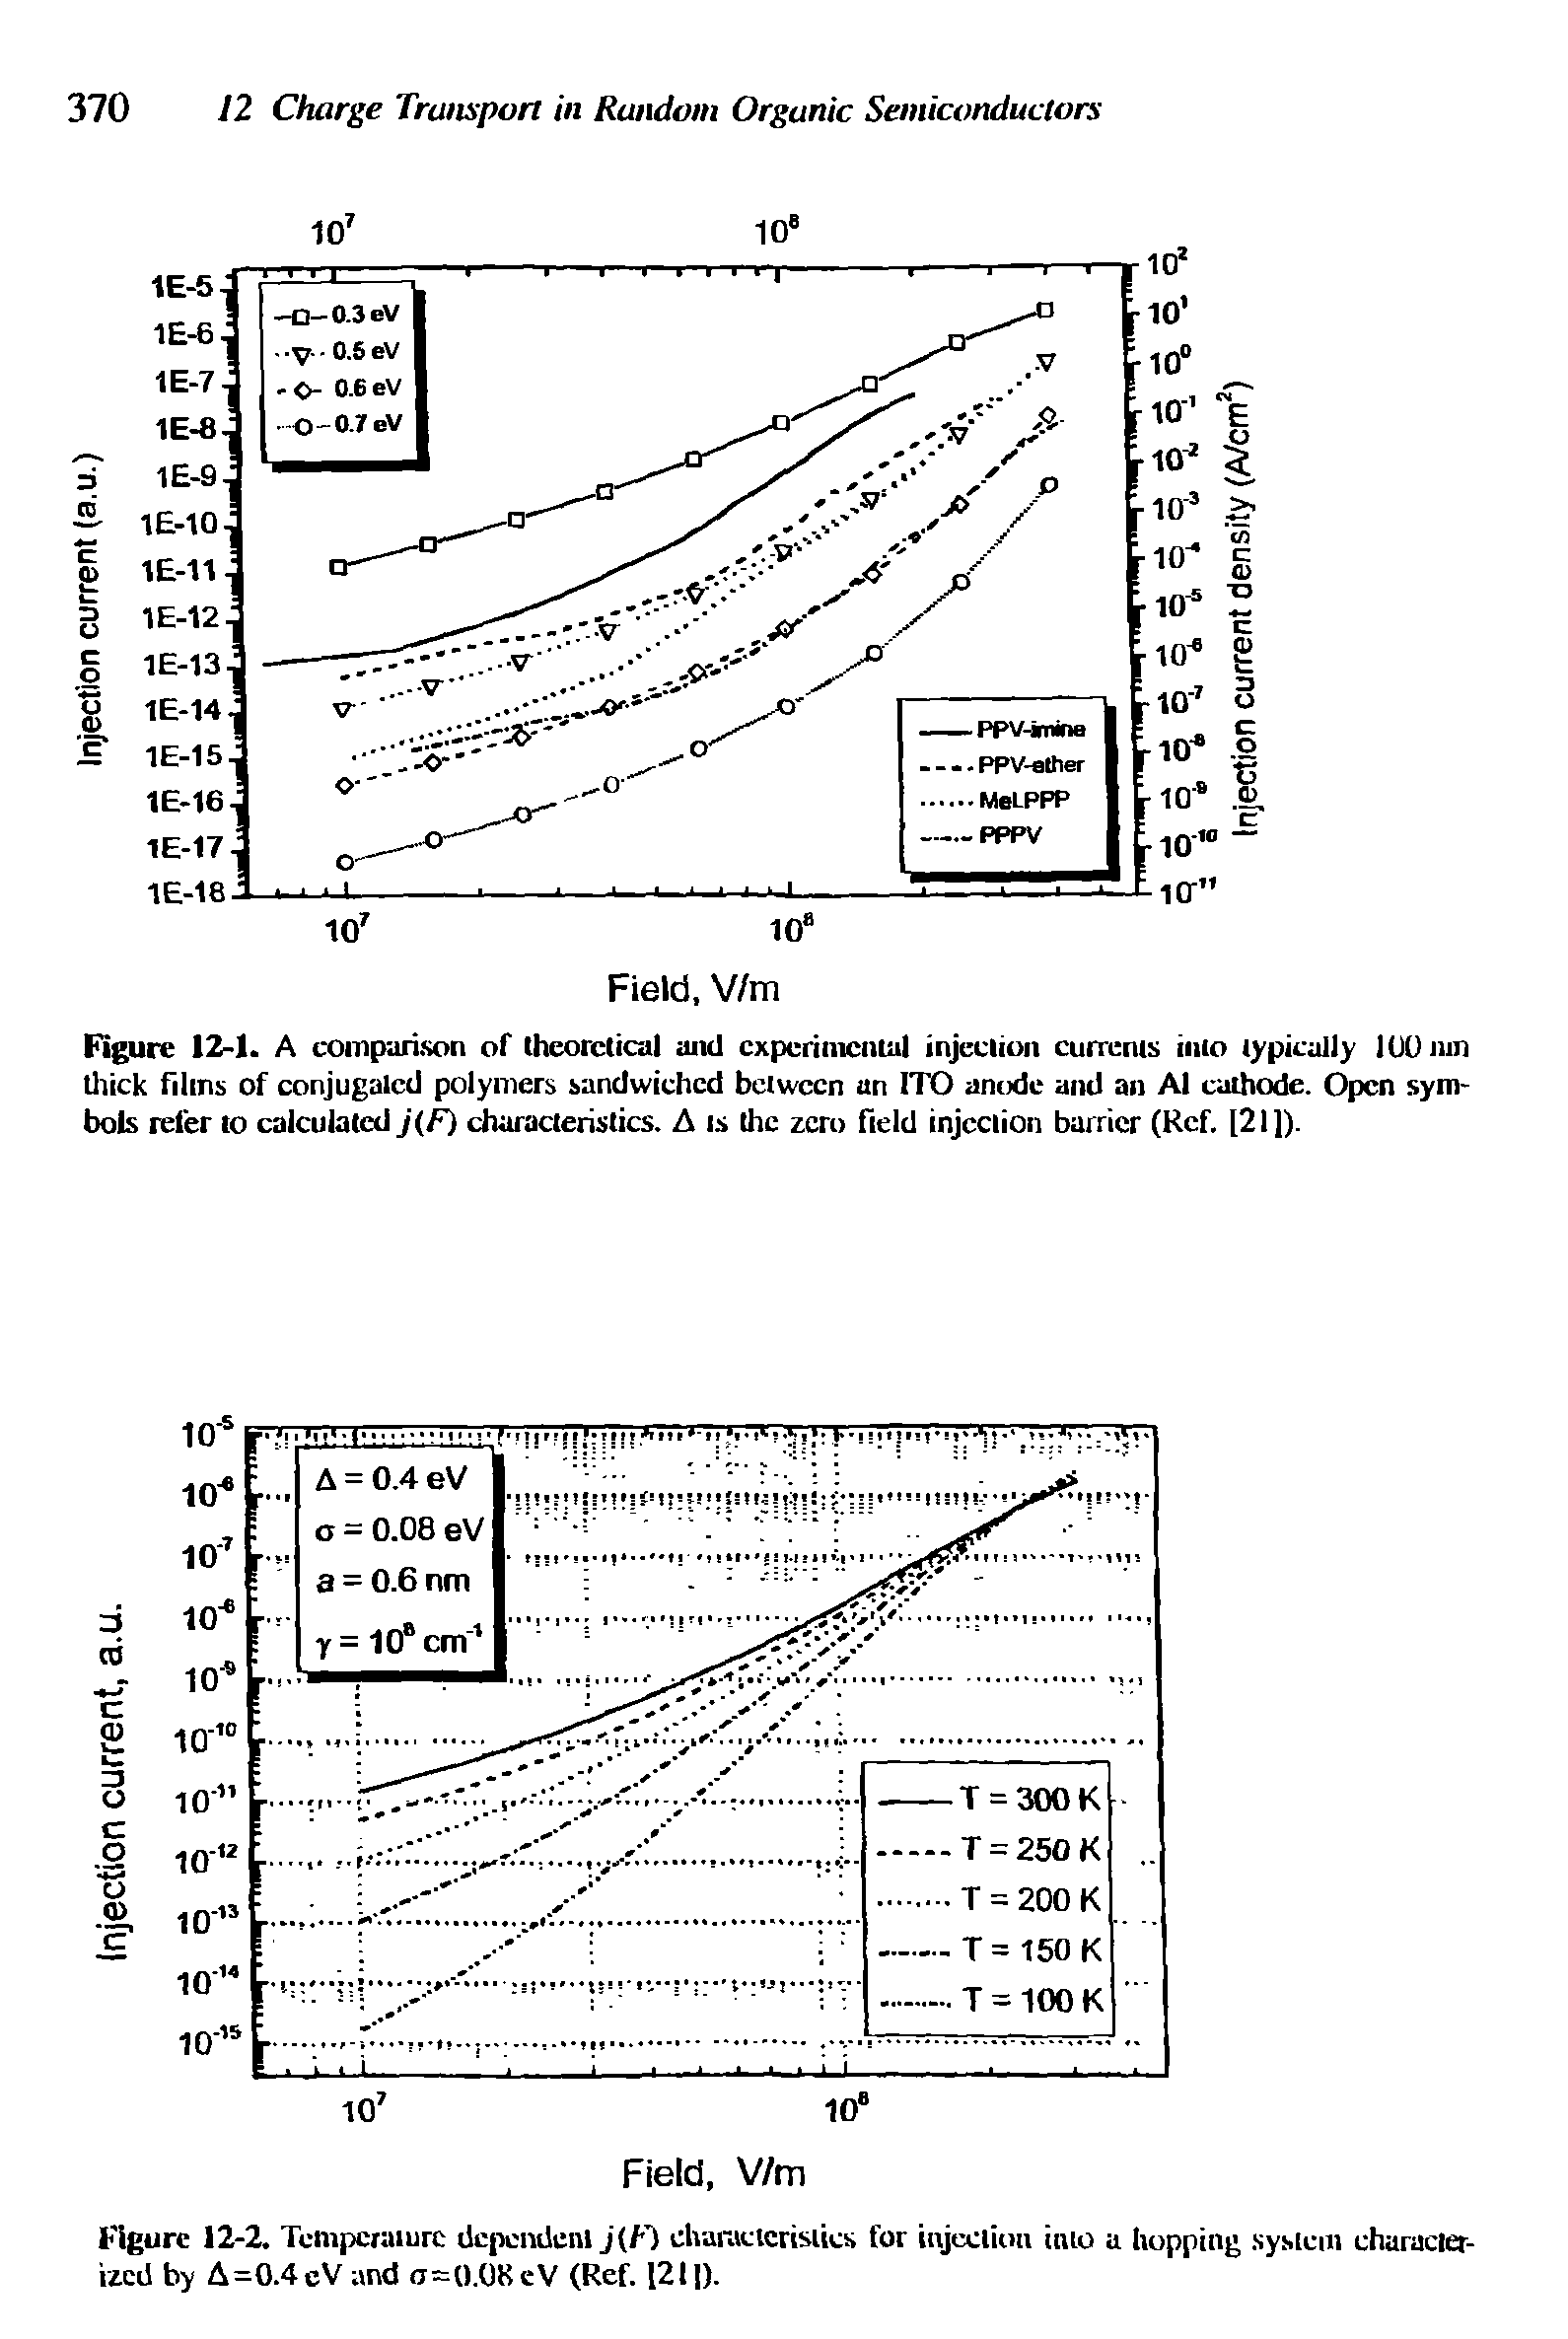 Figure 12-1. A comparison of theoretical and experimental injection currents into typically lOOnin thick films of conjugated polymers sandwiched between an ITO anode and an Al cathode. Open symbols refer to calculated j(F) characteristics. A is the zero field injection barrier (Ref. [21]).